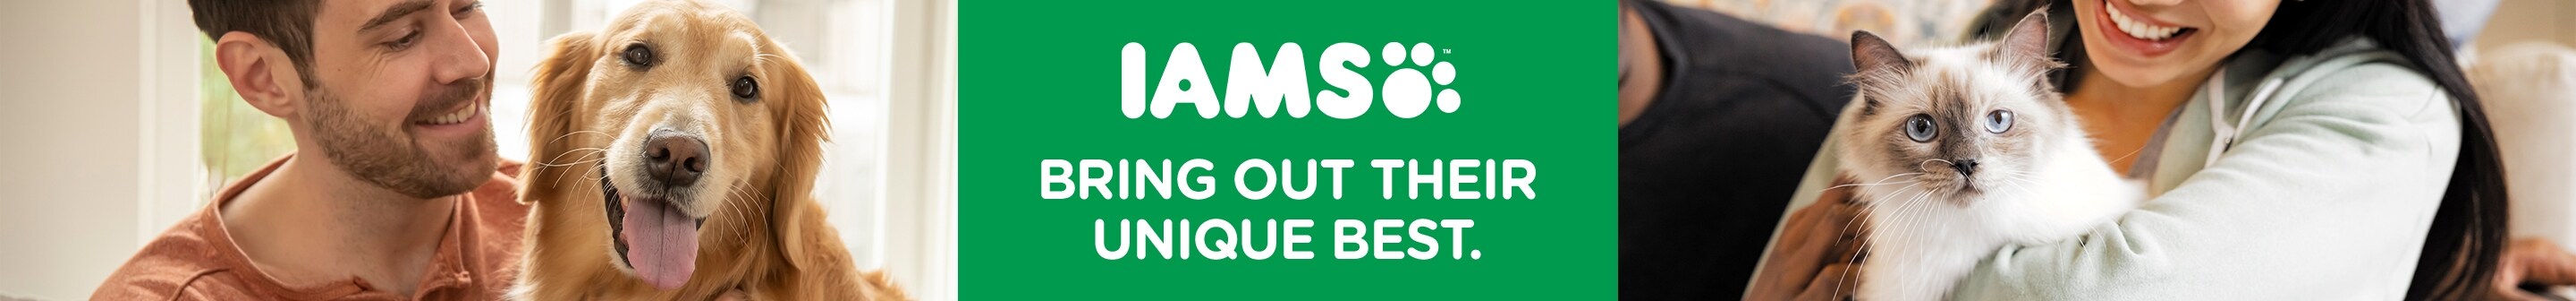 IAMS. Bring out their unique best